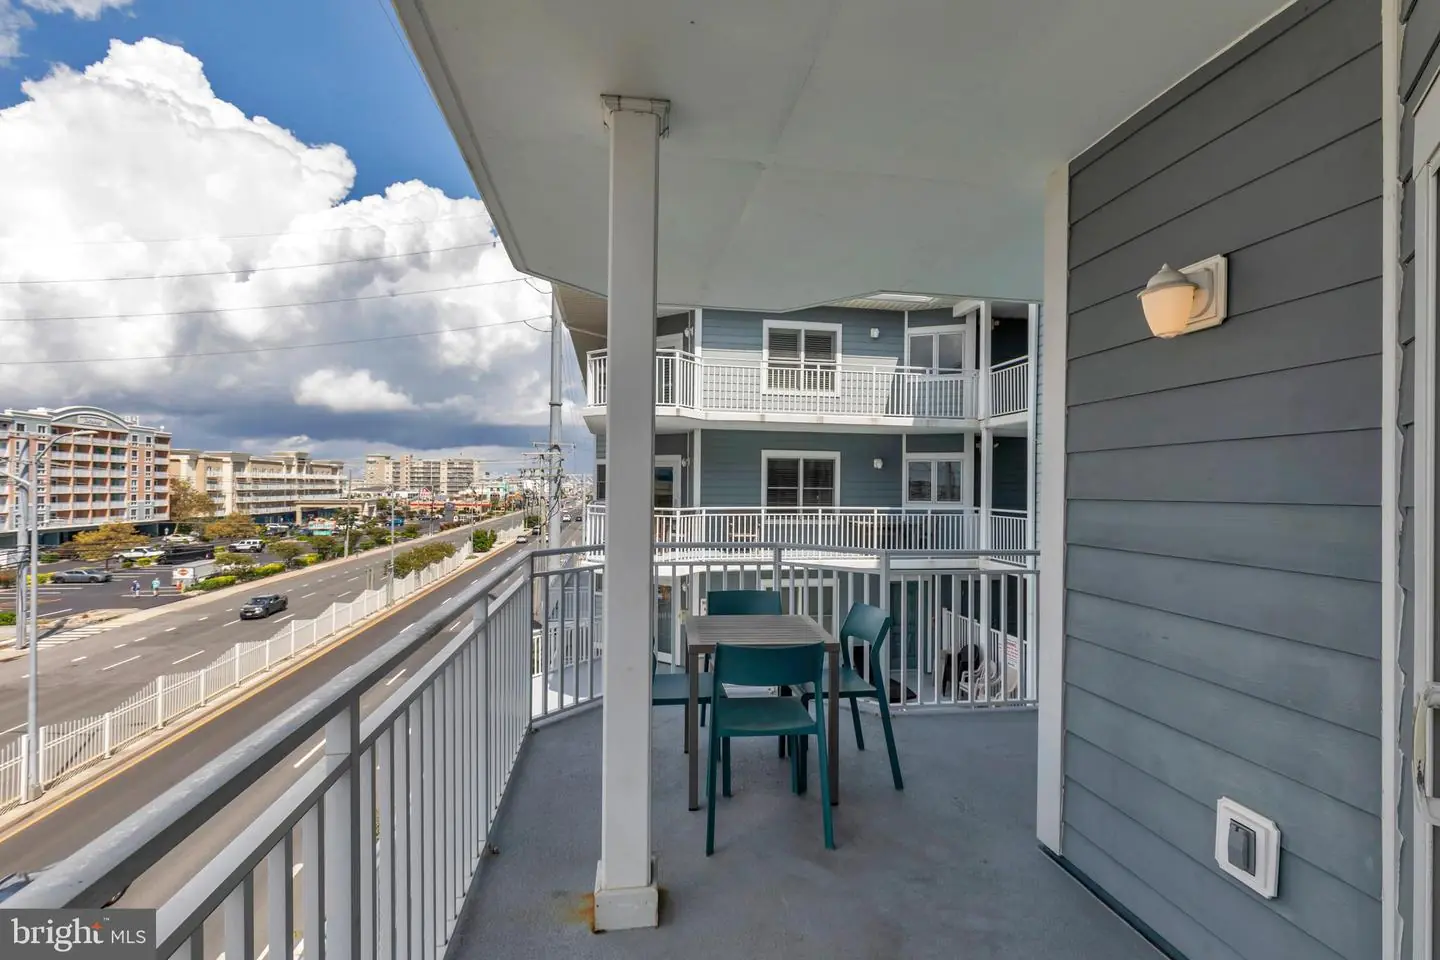 MDWO2015722-802606209930-2024-02-22-09-49-25 18 41st St #302 | Ocean City, MD Real Estate For Sale | MLS# Mdwo2015722  - 1st Choice Properties